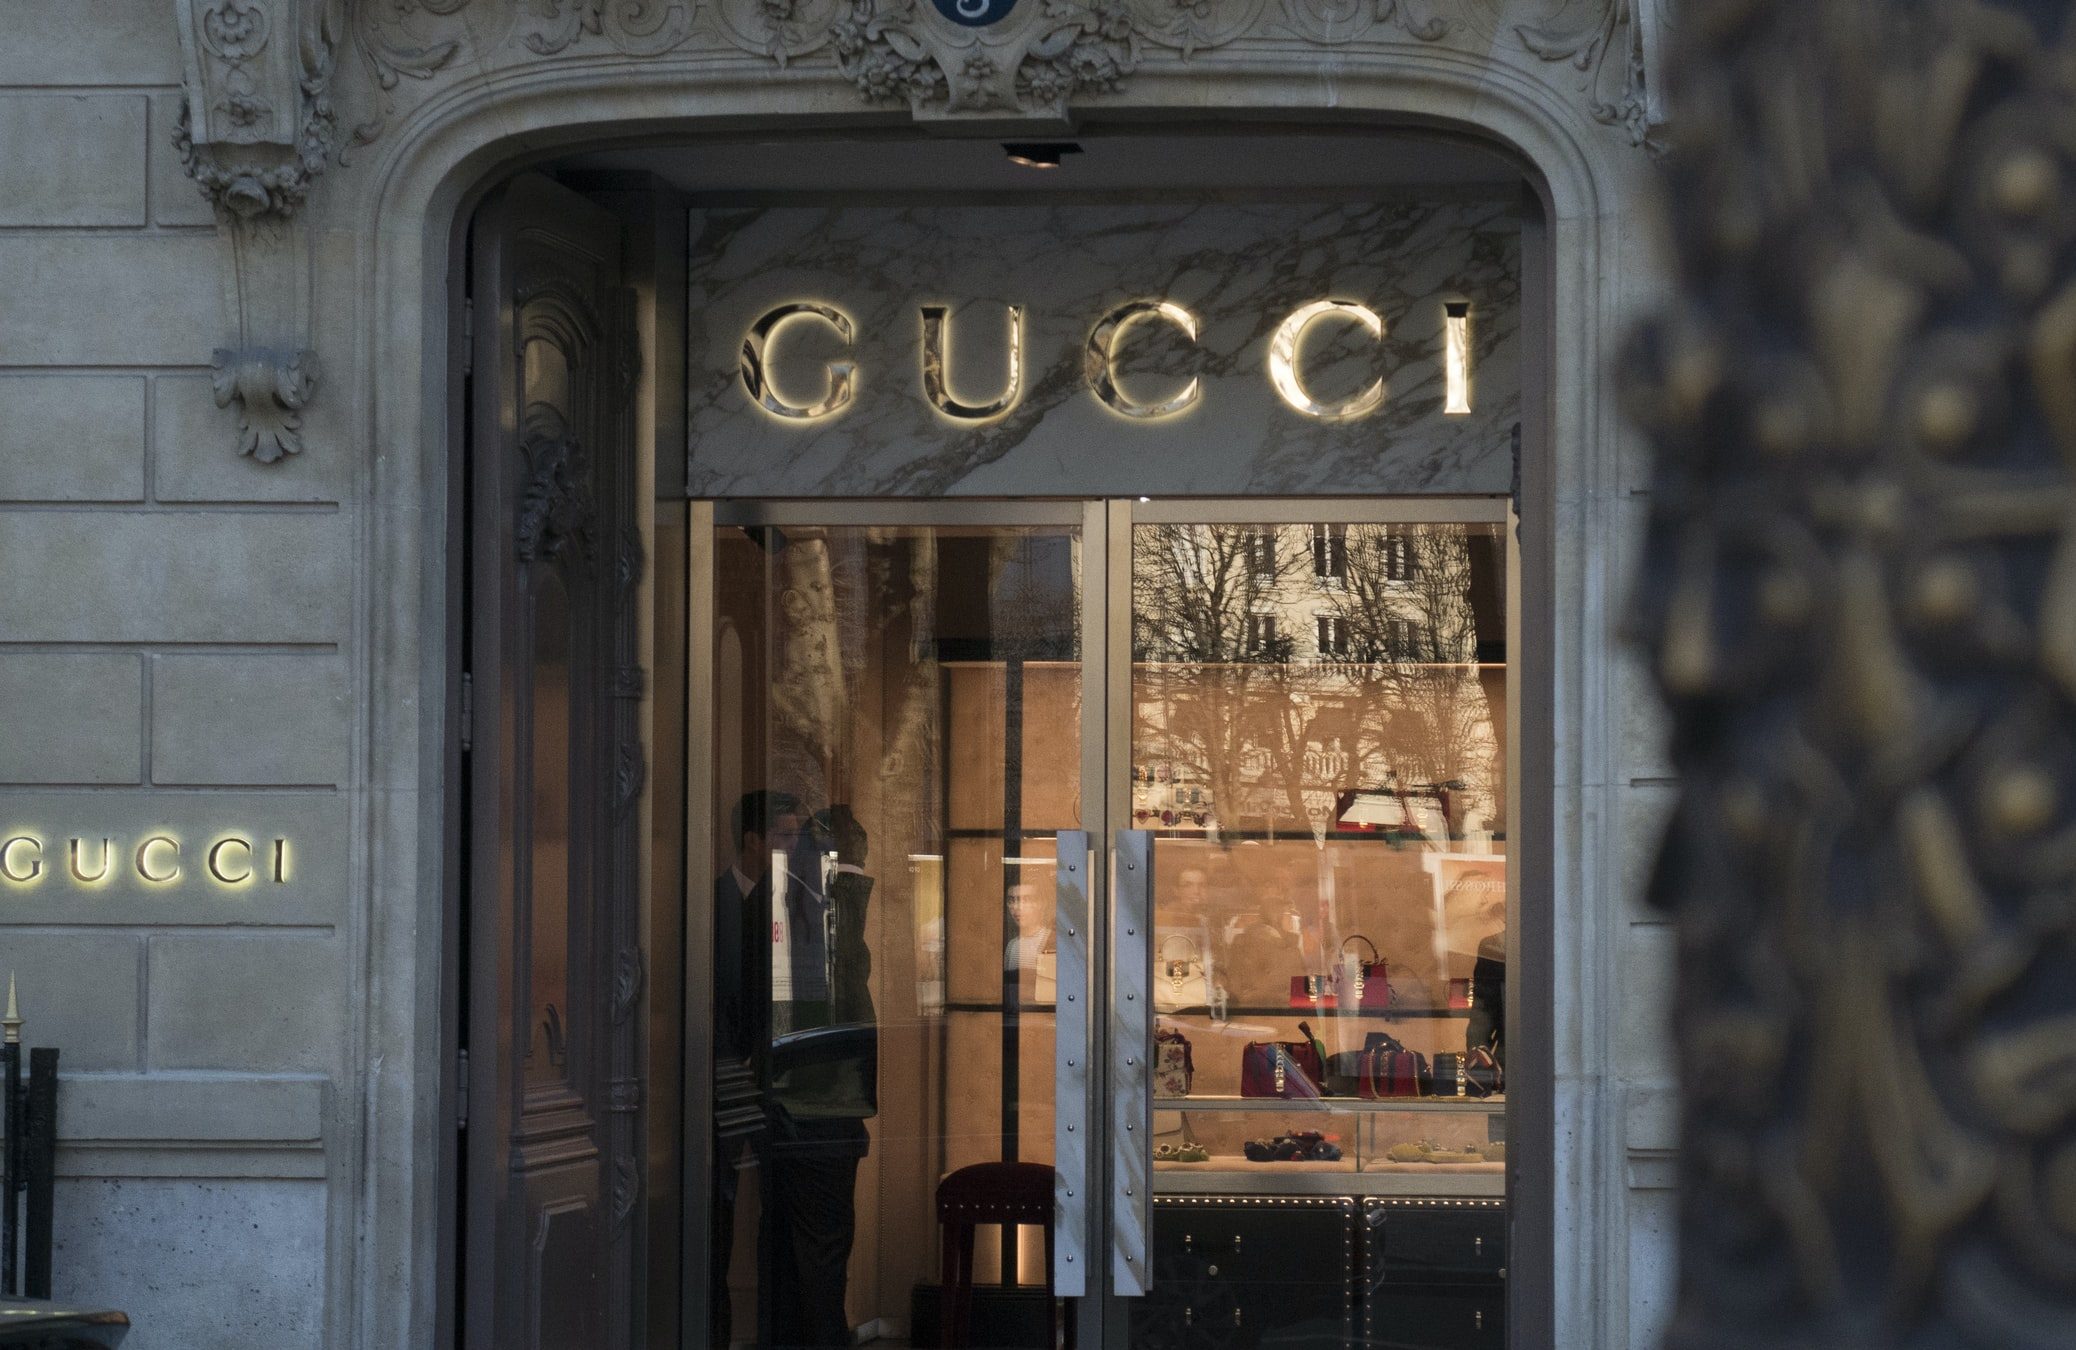 What is the cheapest Gucci item in the world? Shocking prices here